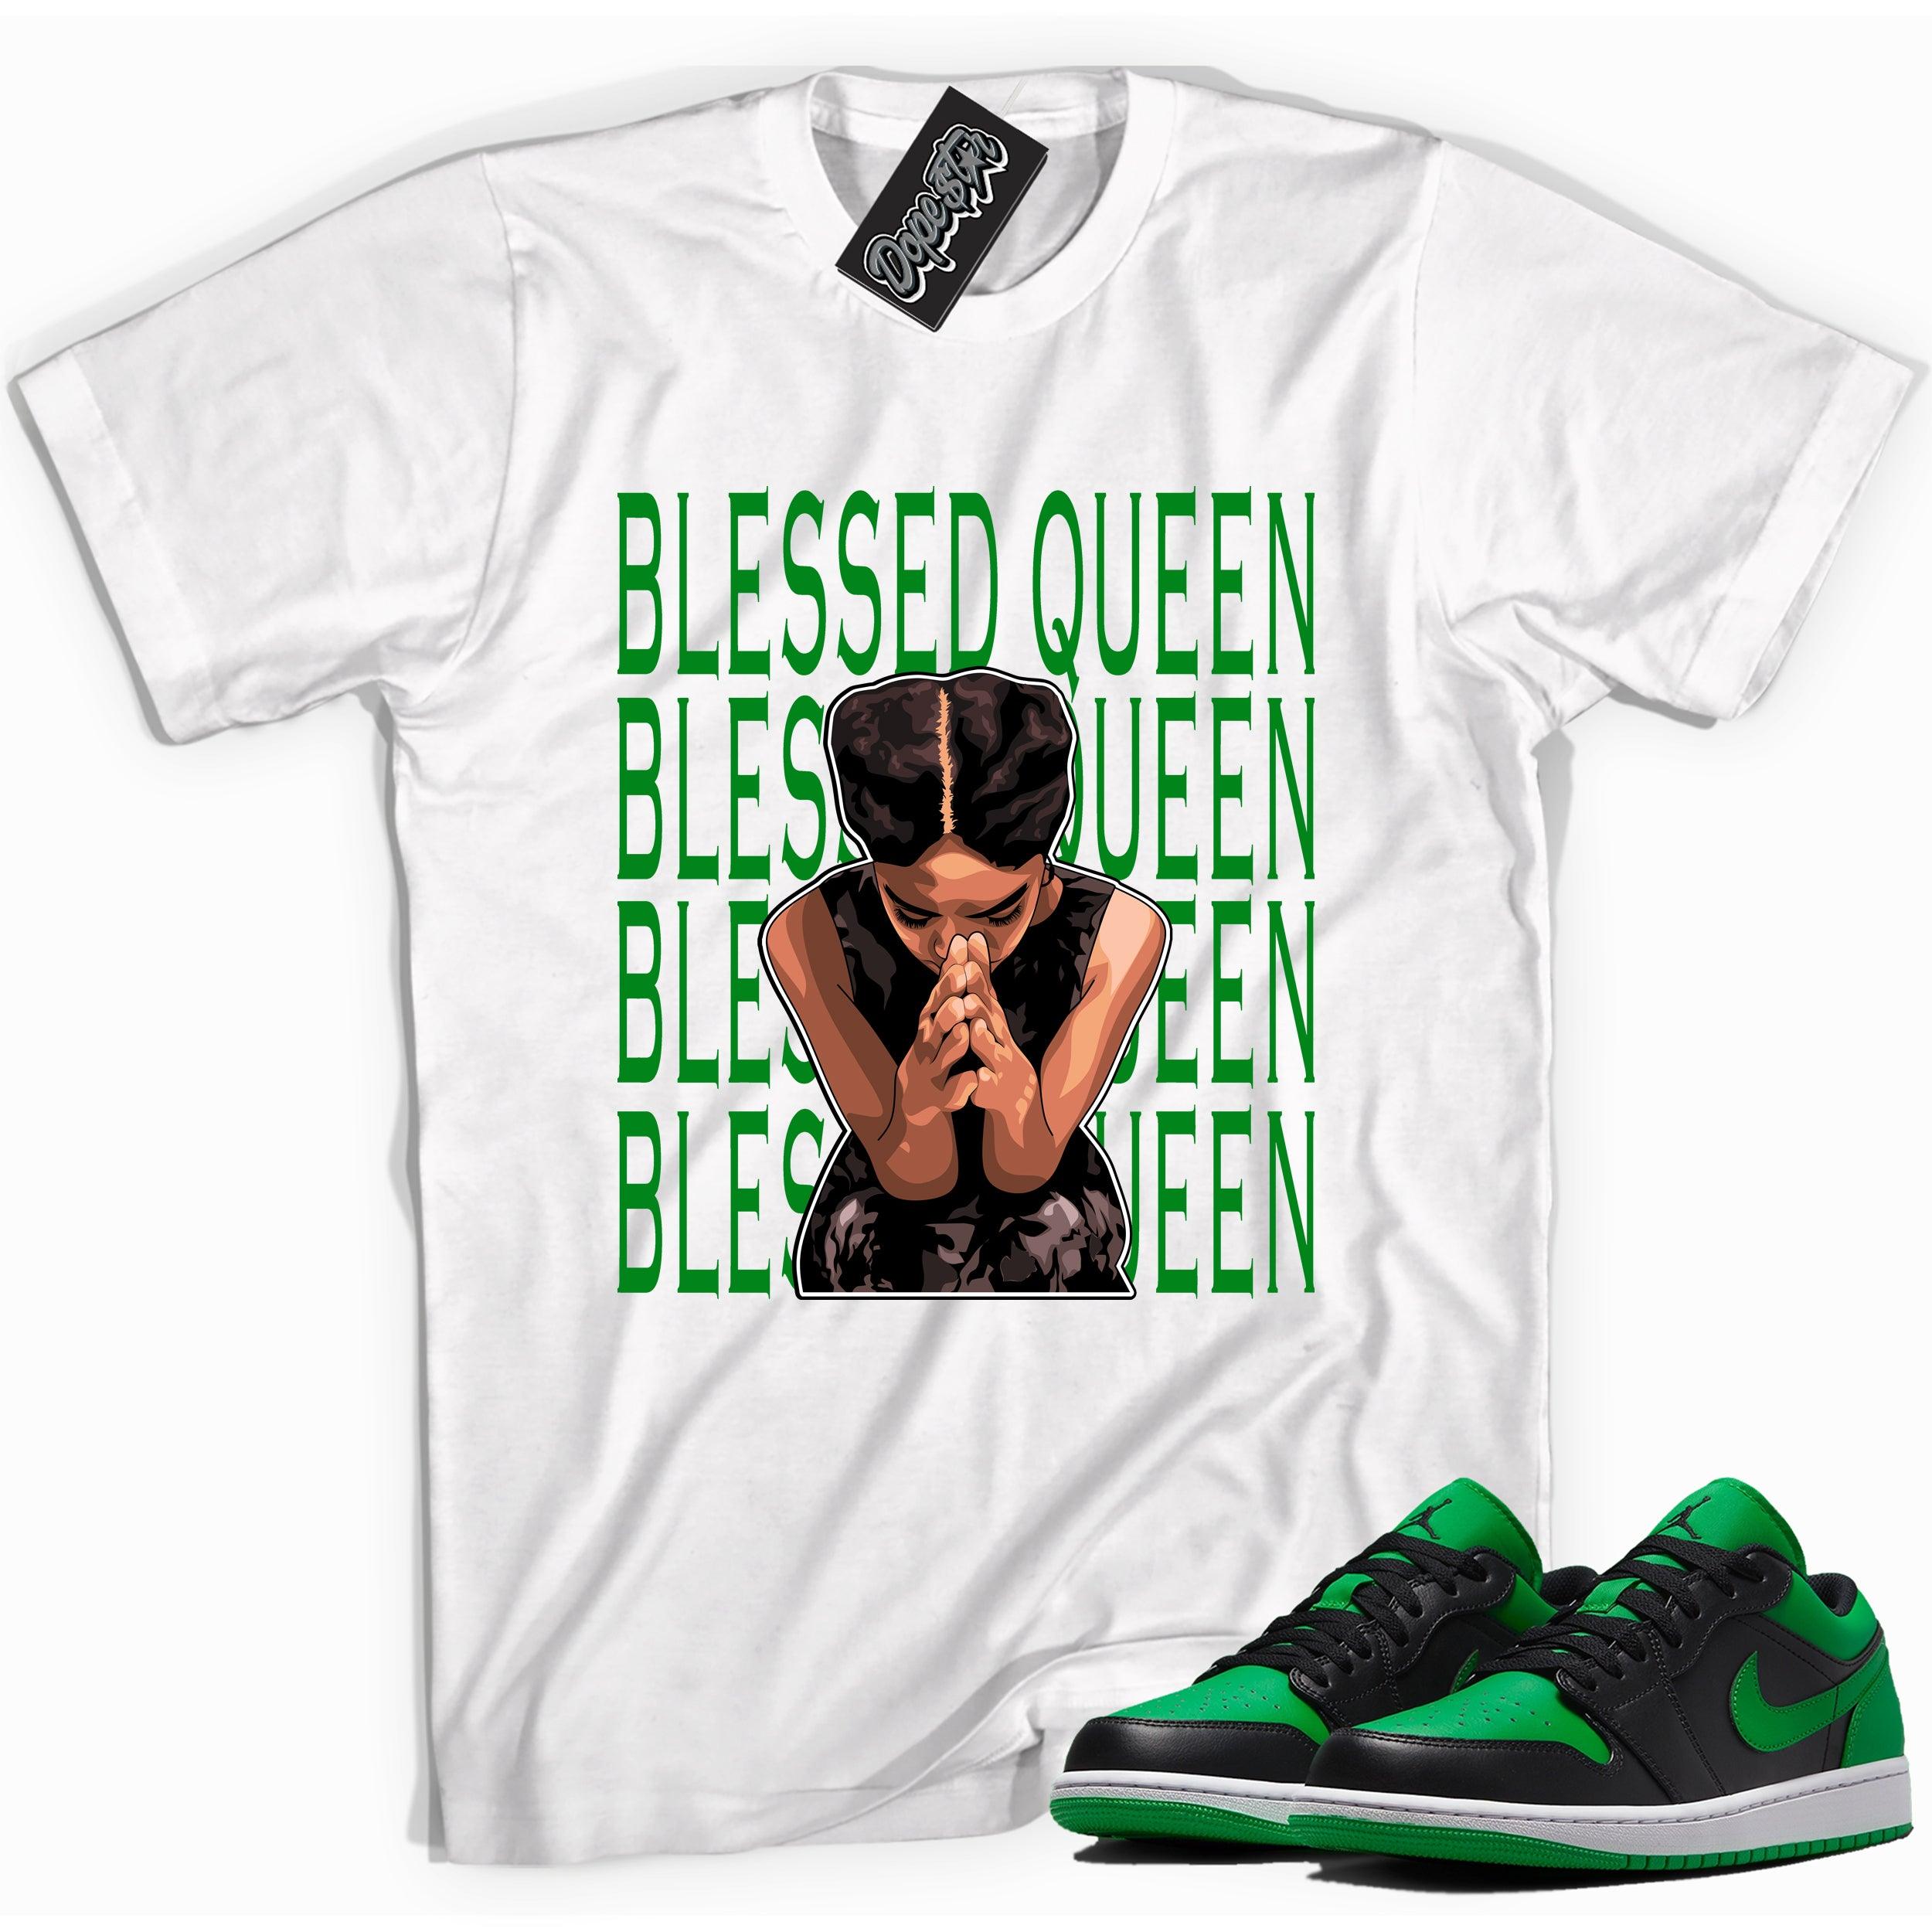 Cool white graphic tee with 'Blessed Queen' print, that perfectly matches Air Jordan 1 Low Lucky Green sneakers